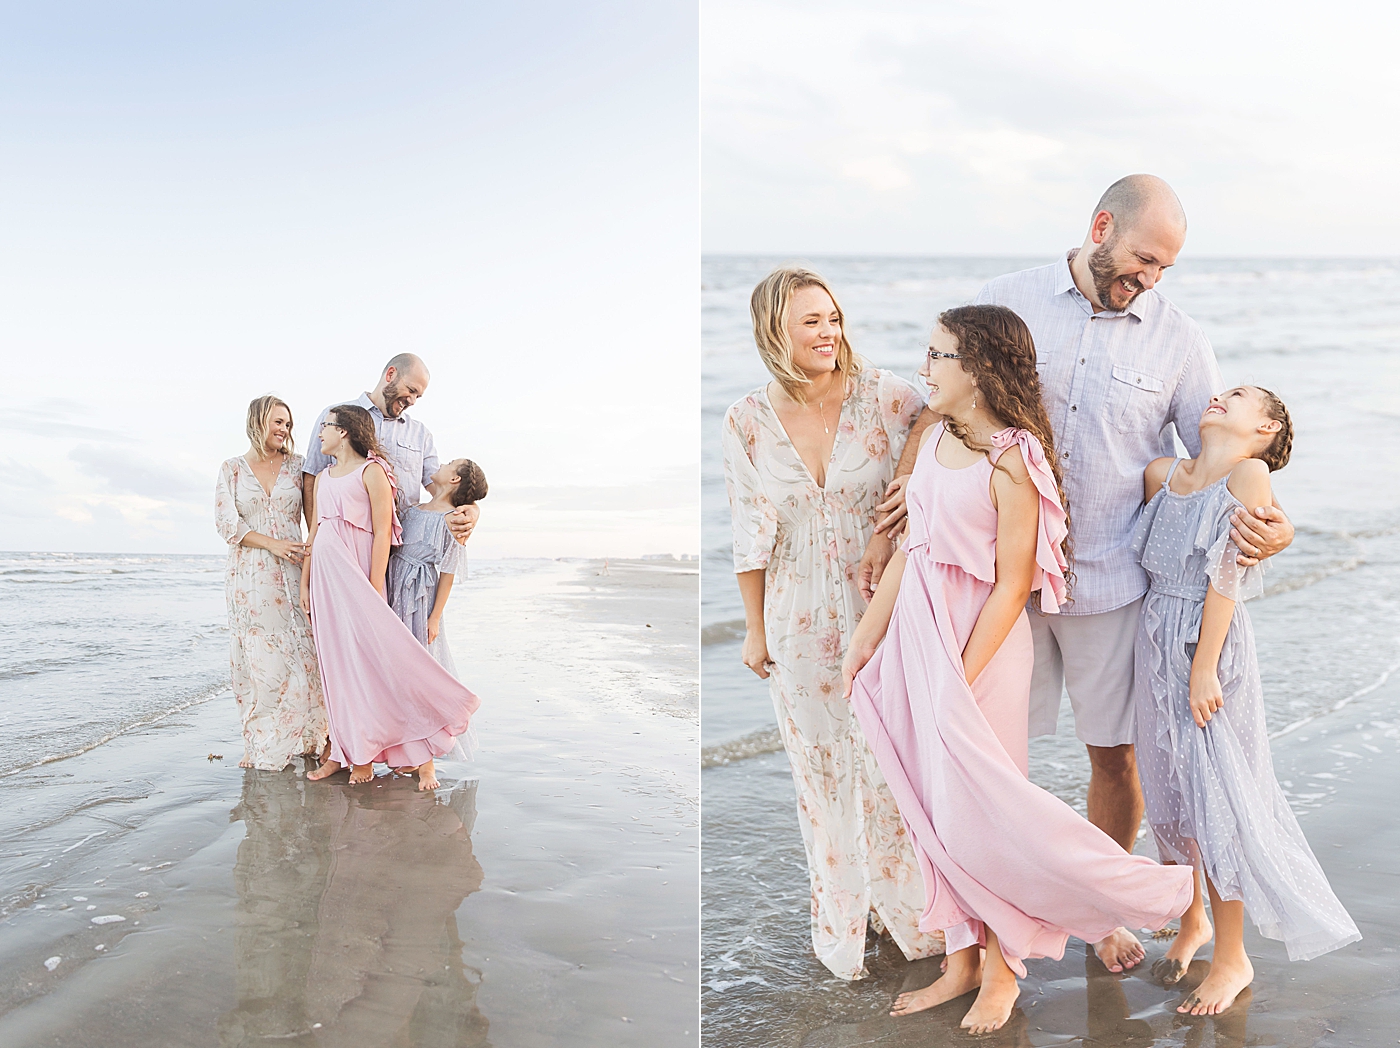 Candid moments on the beach during family photoshoot. Photo by Fresh Light Photography.